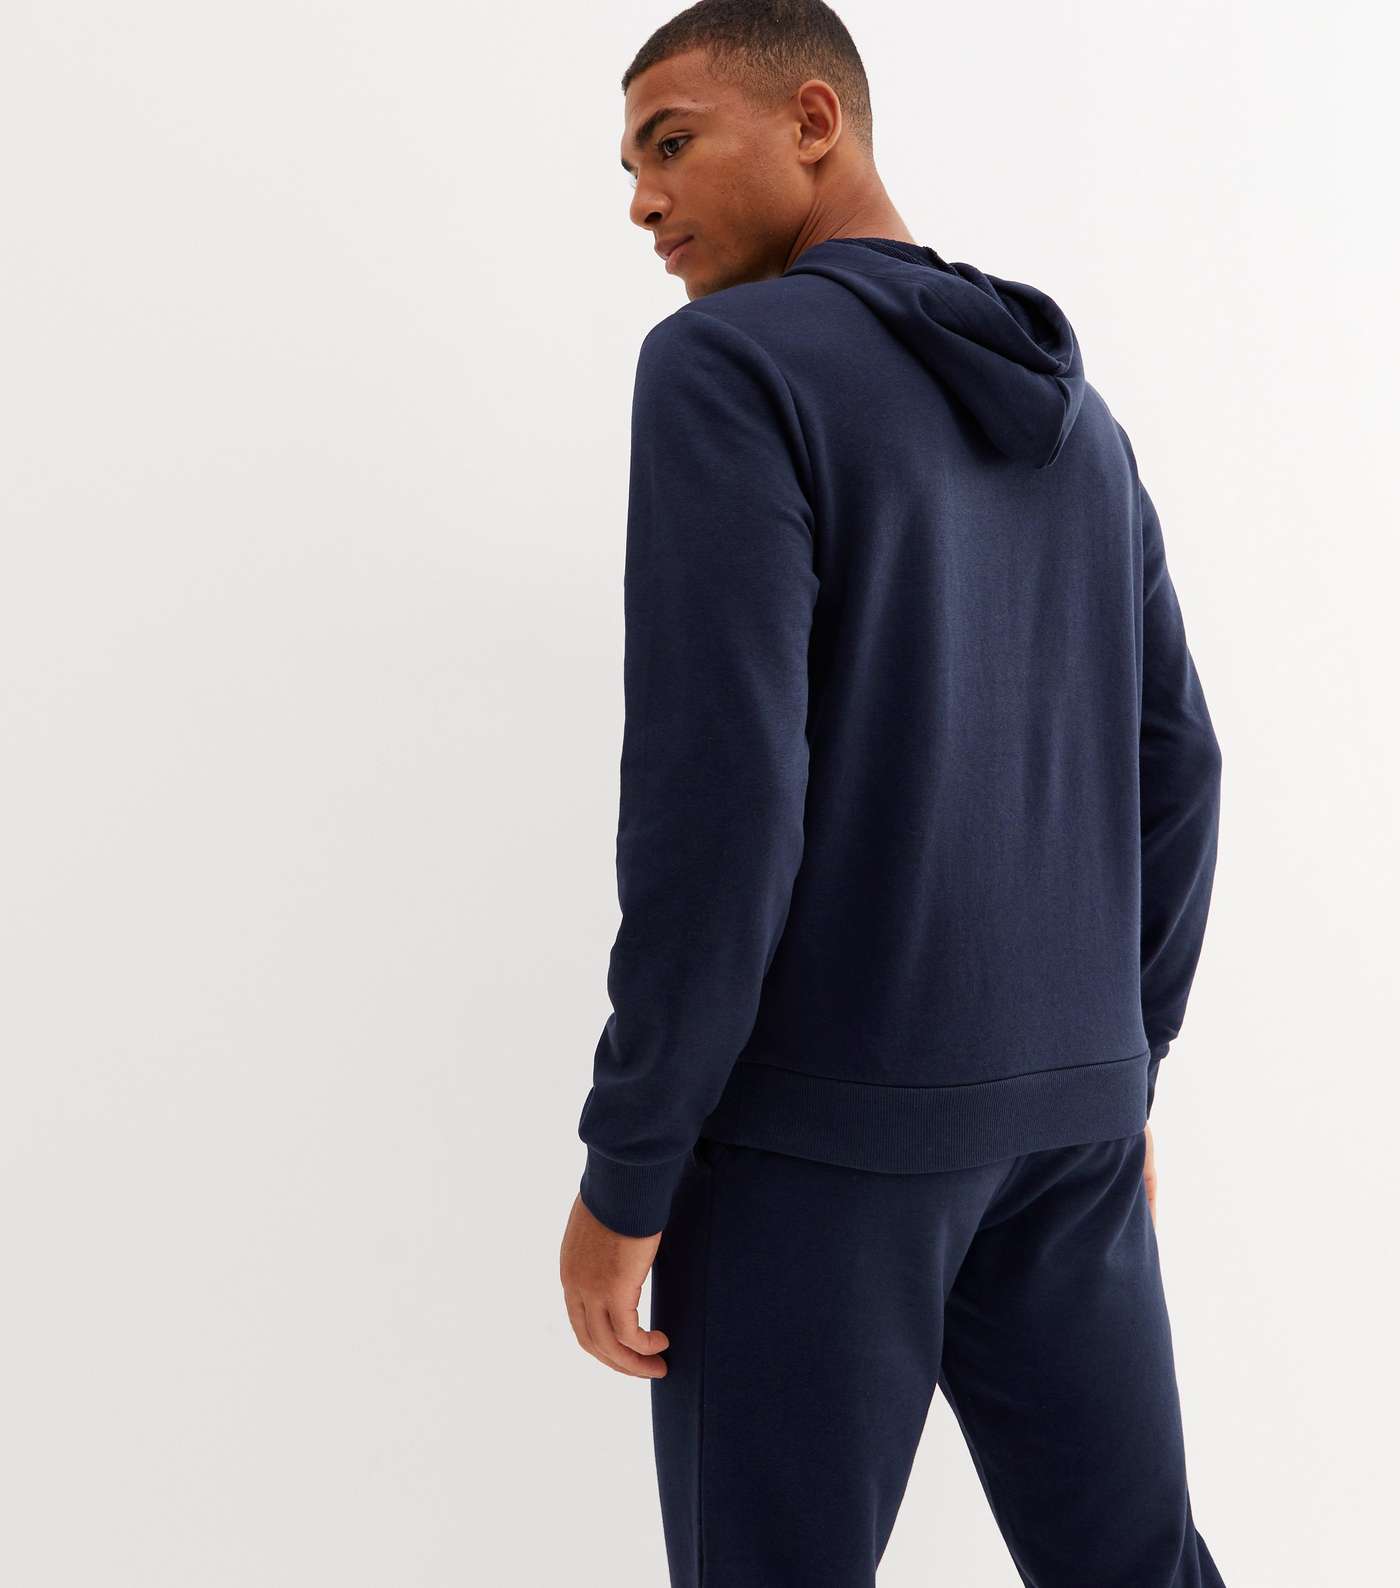 Navy Jersey Pocket Front Long Sleeve Hoodie Image 4